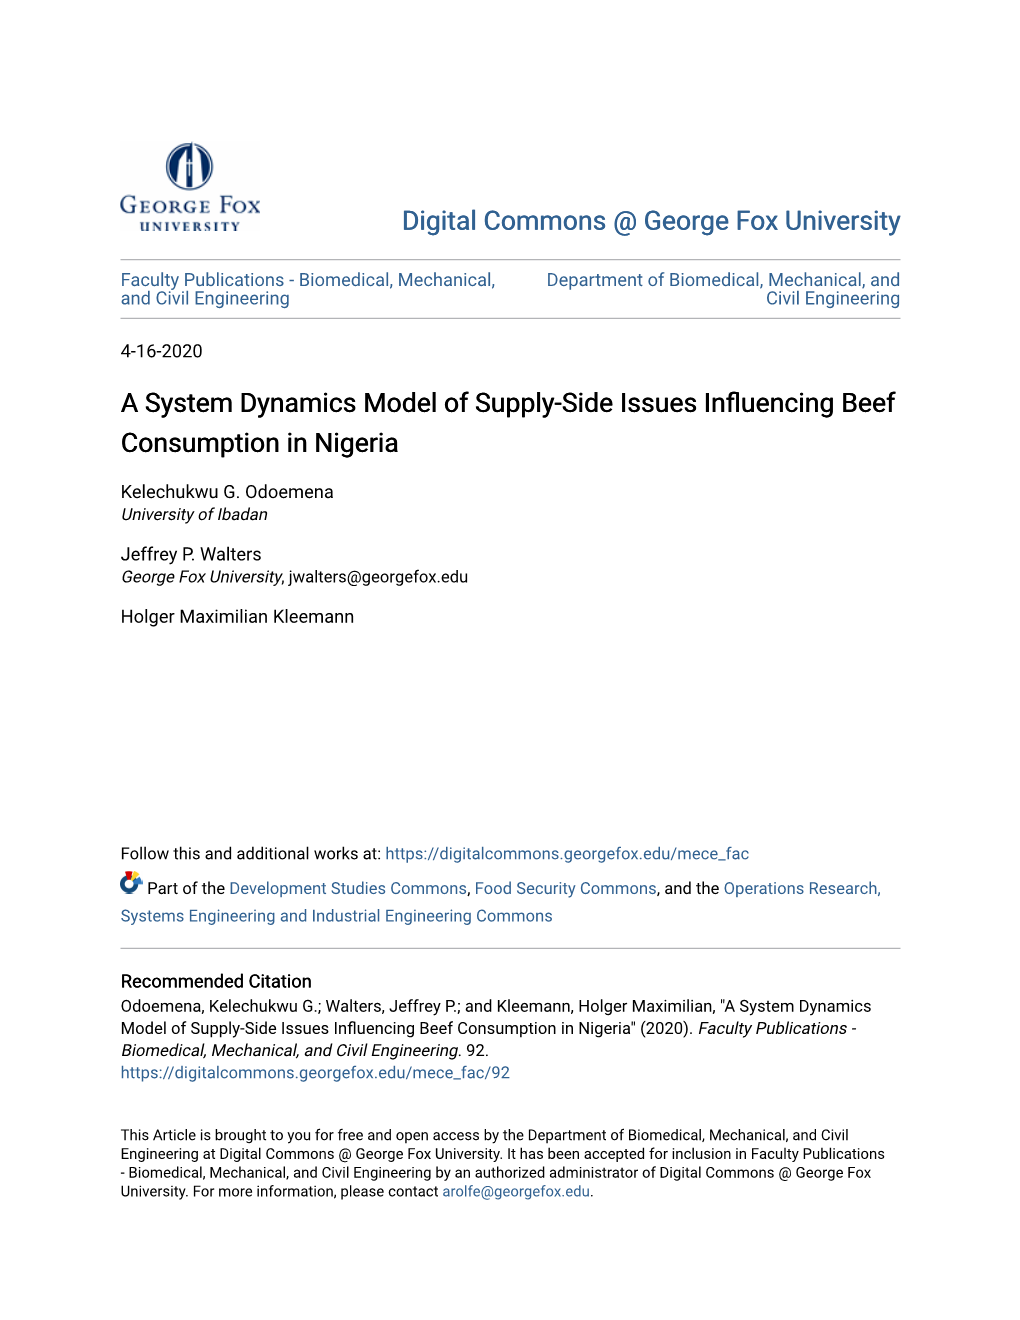 A System Dynamics Model of Supply-Side Issues Influencing Beef Consumption in Nigeria